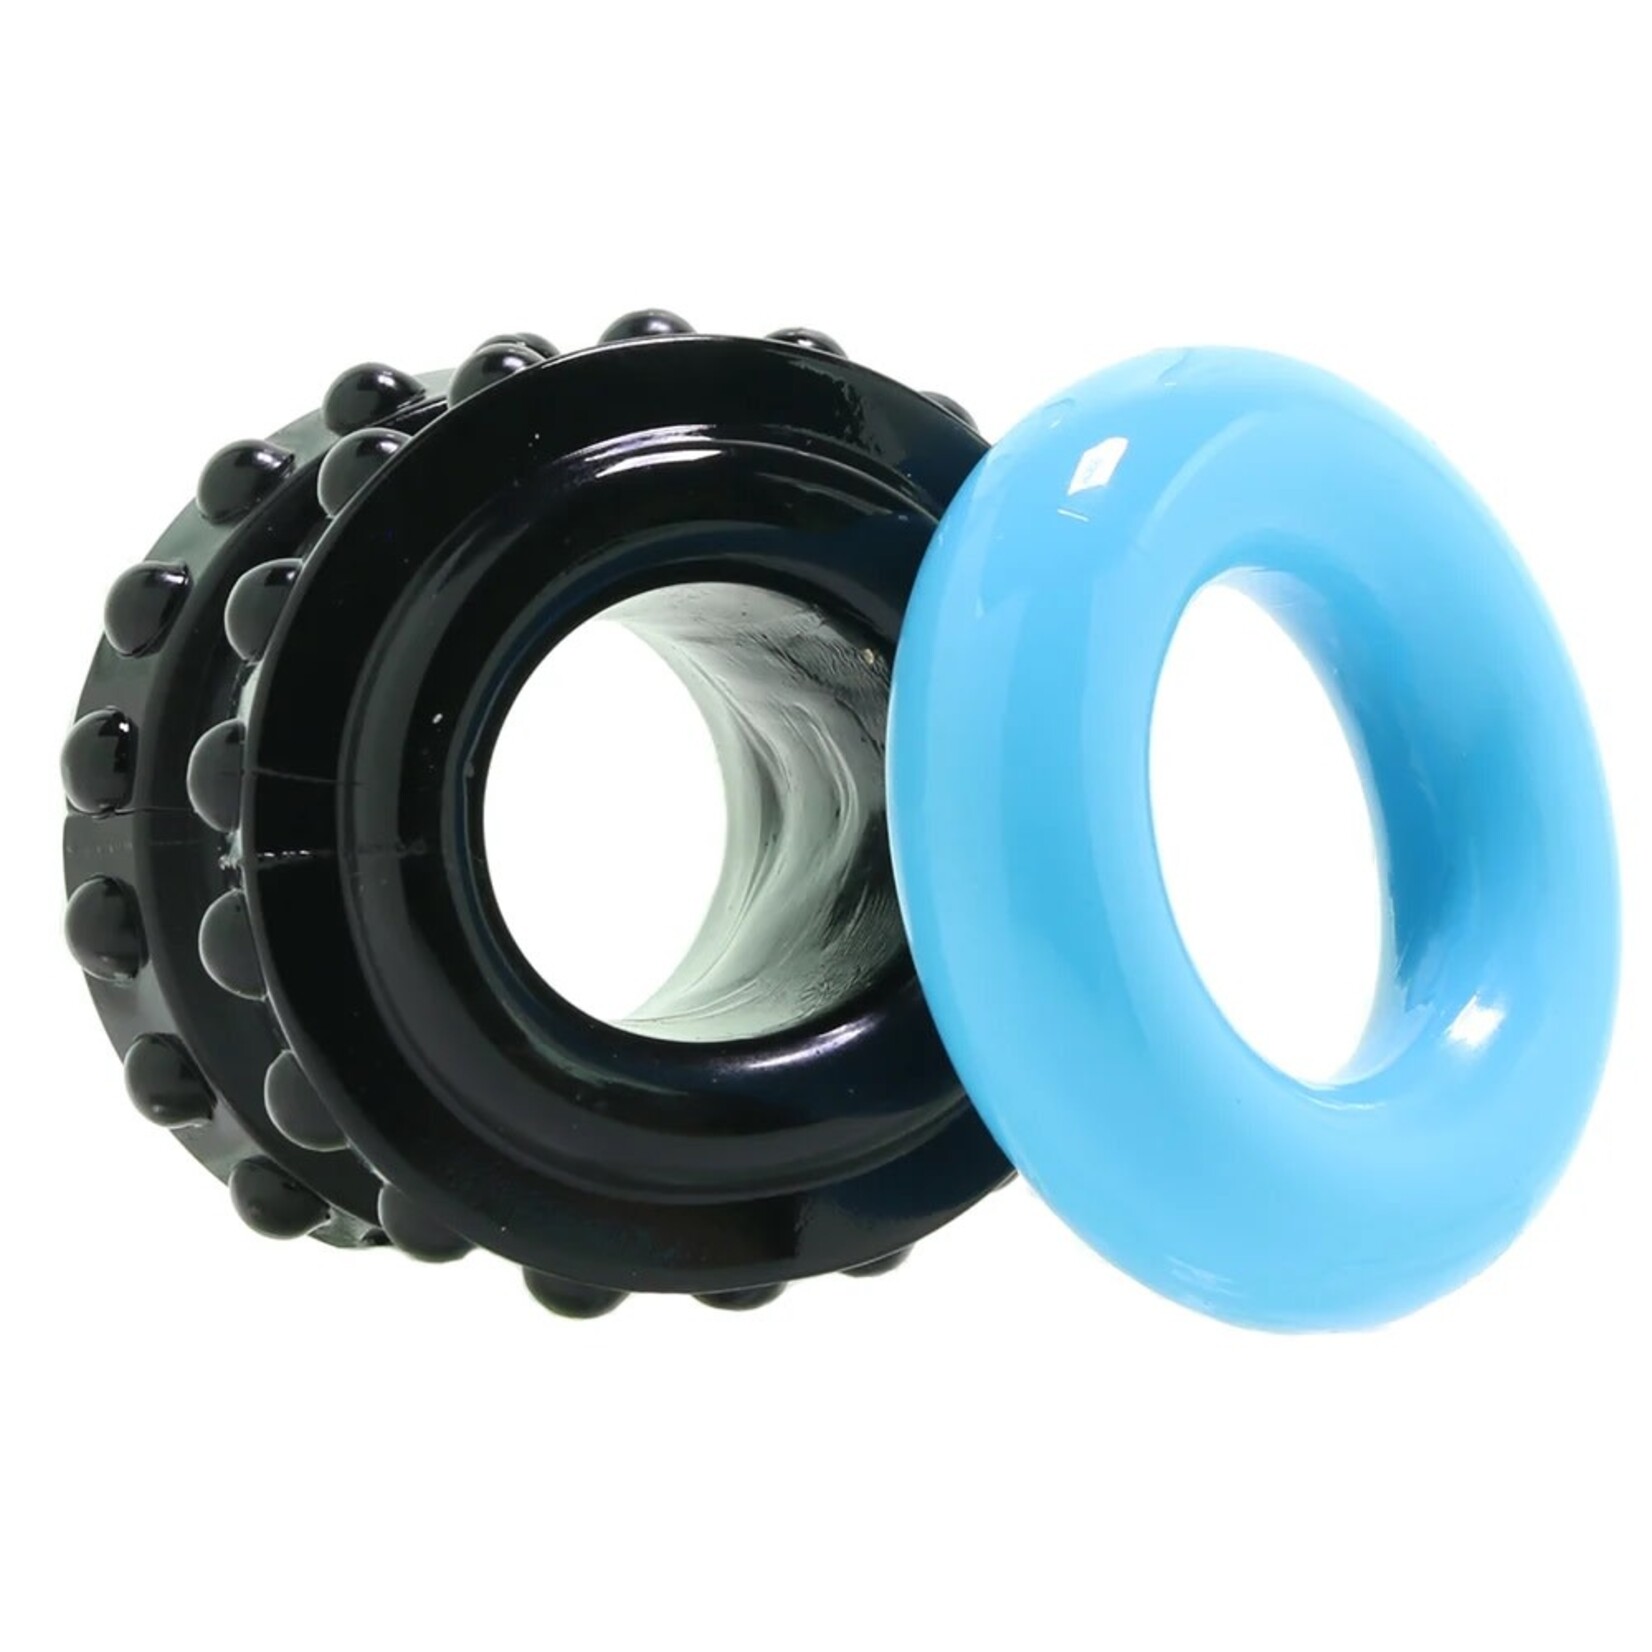 CONTROL PRO PERFORMANCE BEGINNERS C-RING